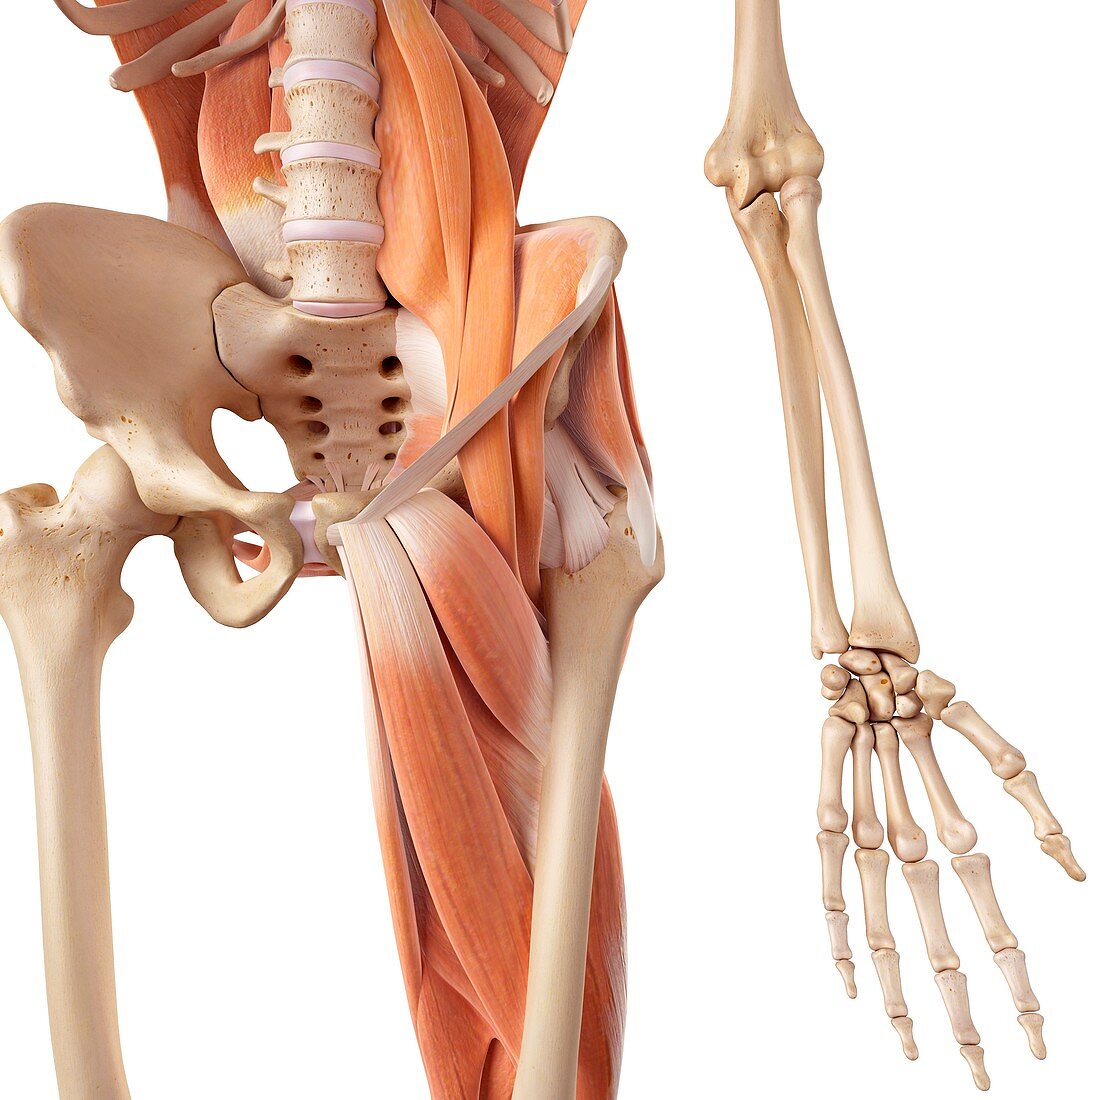 Human hip and leg muscles